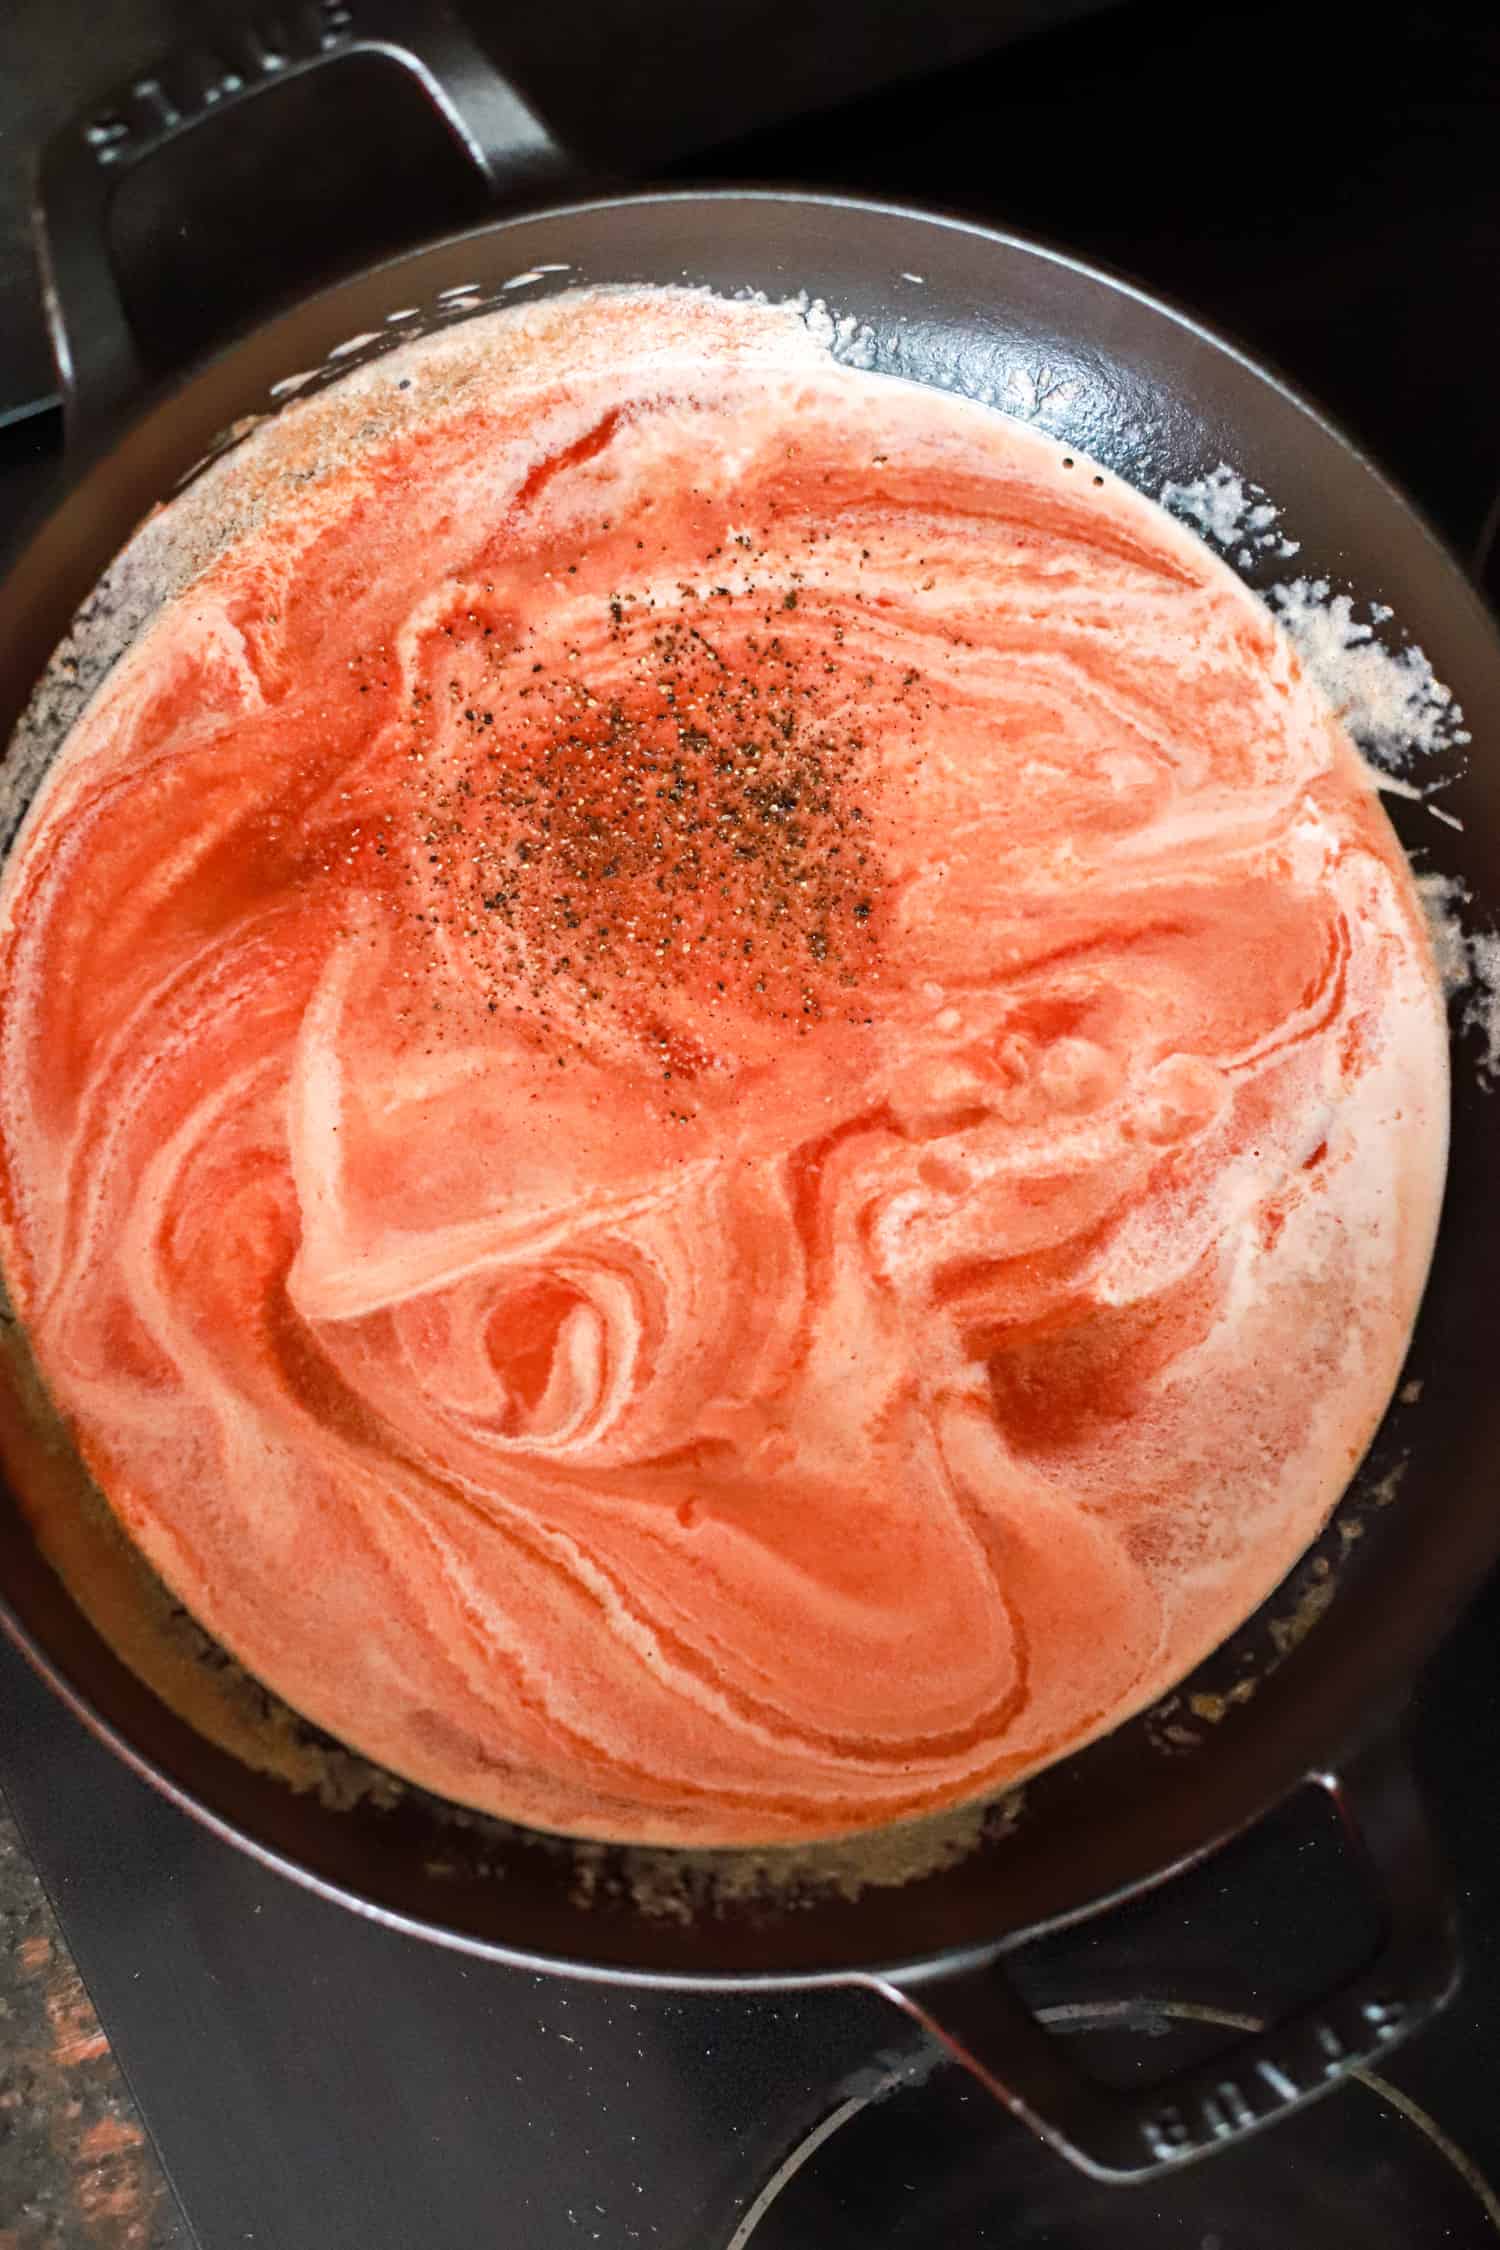 marbled look pink pasta sauce in black skillet with pepper flakes.